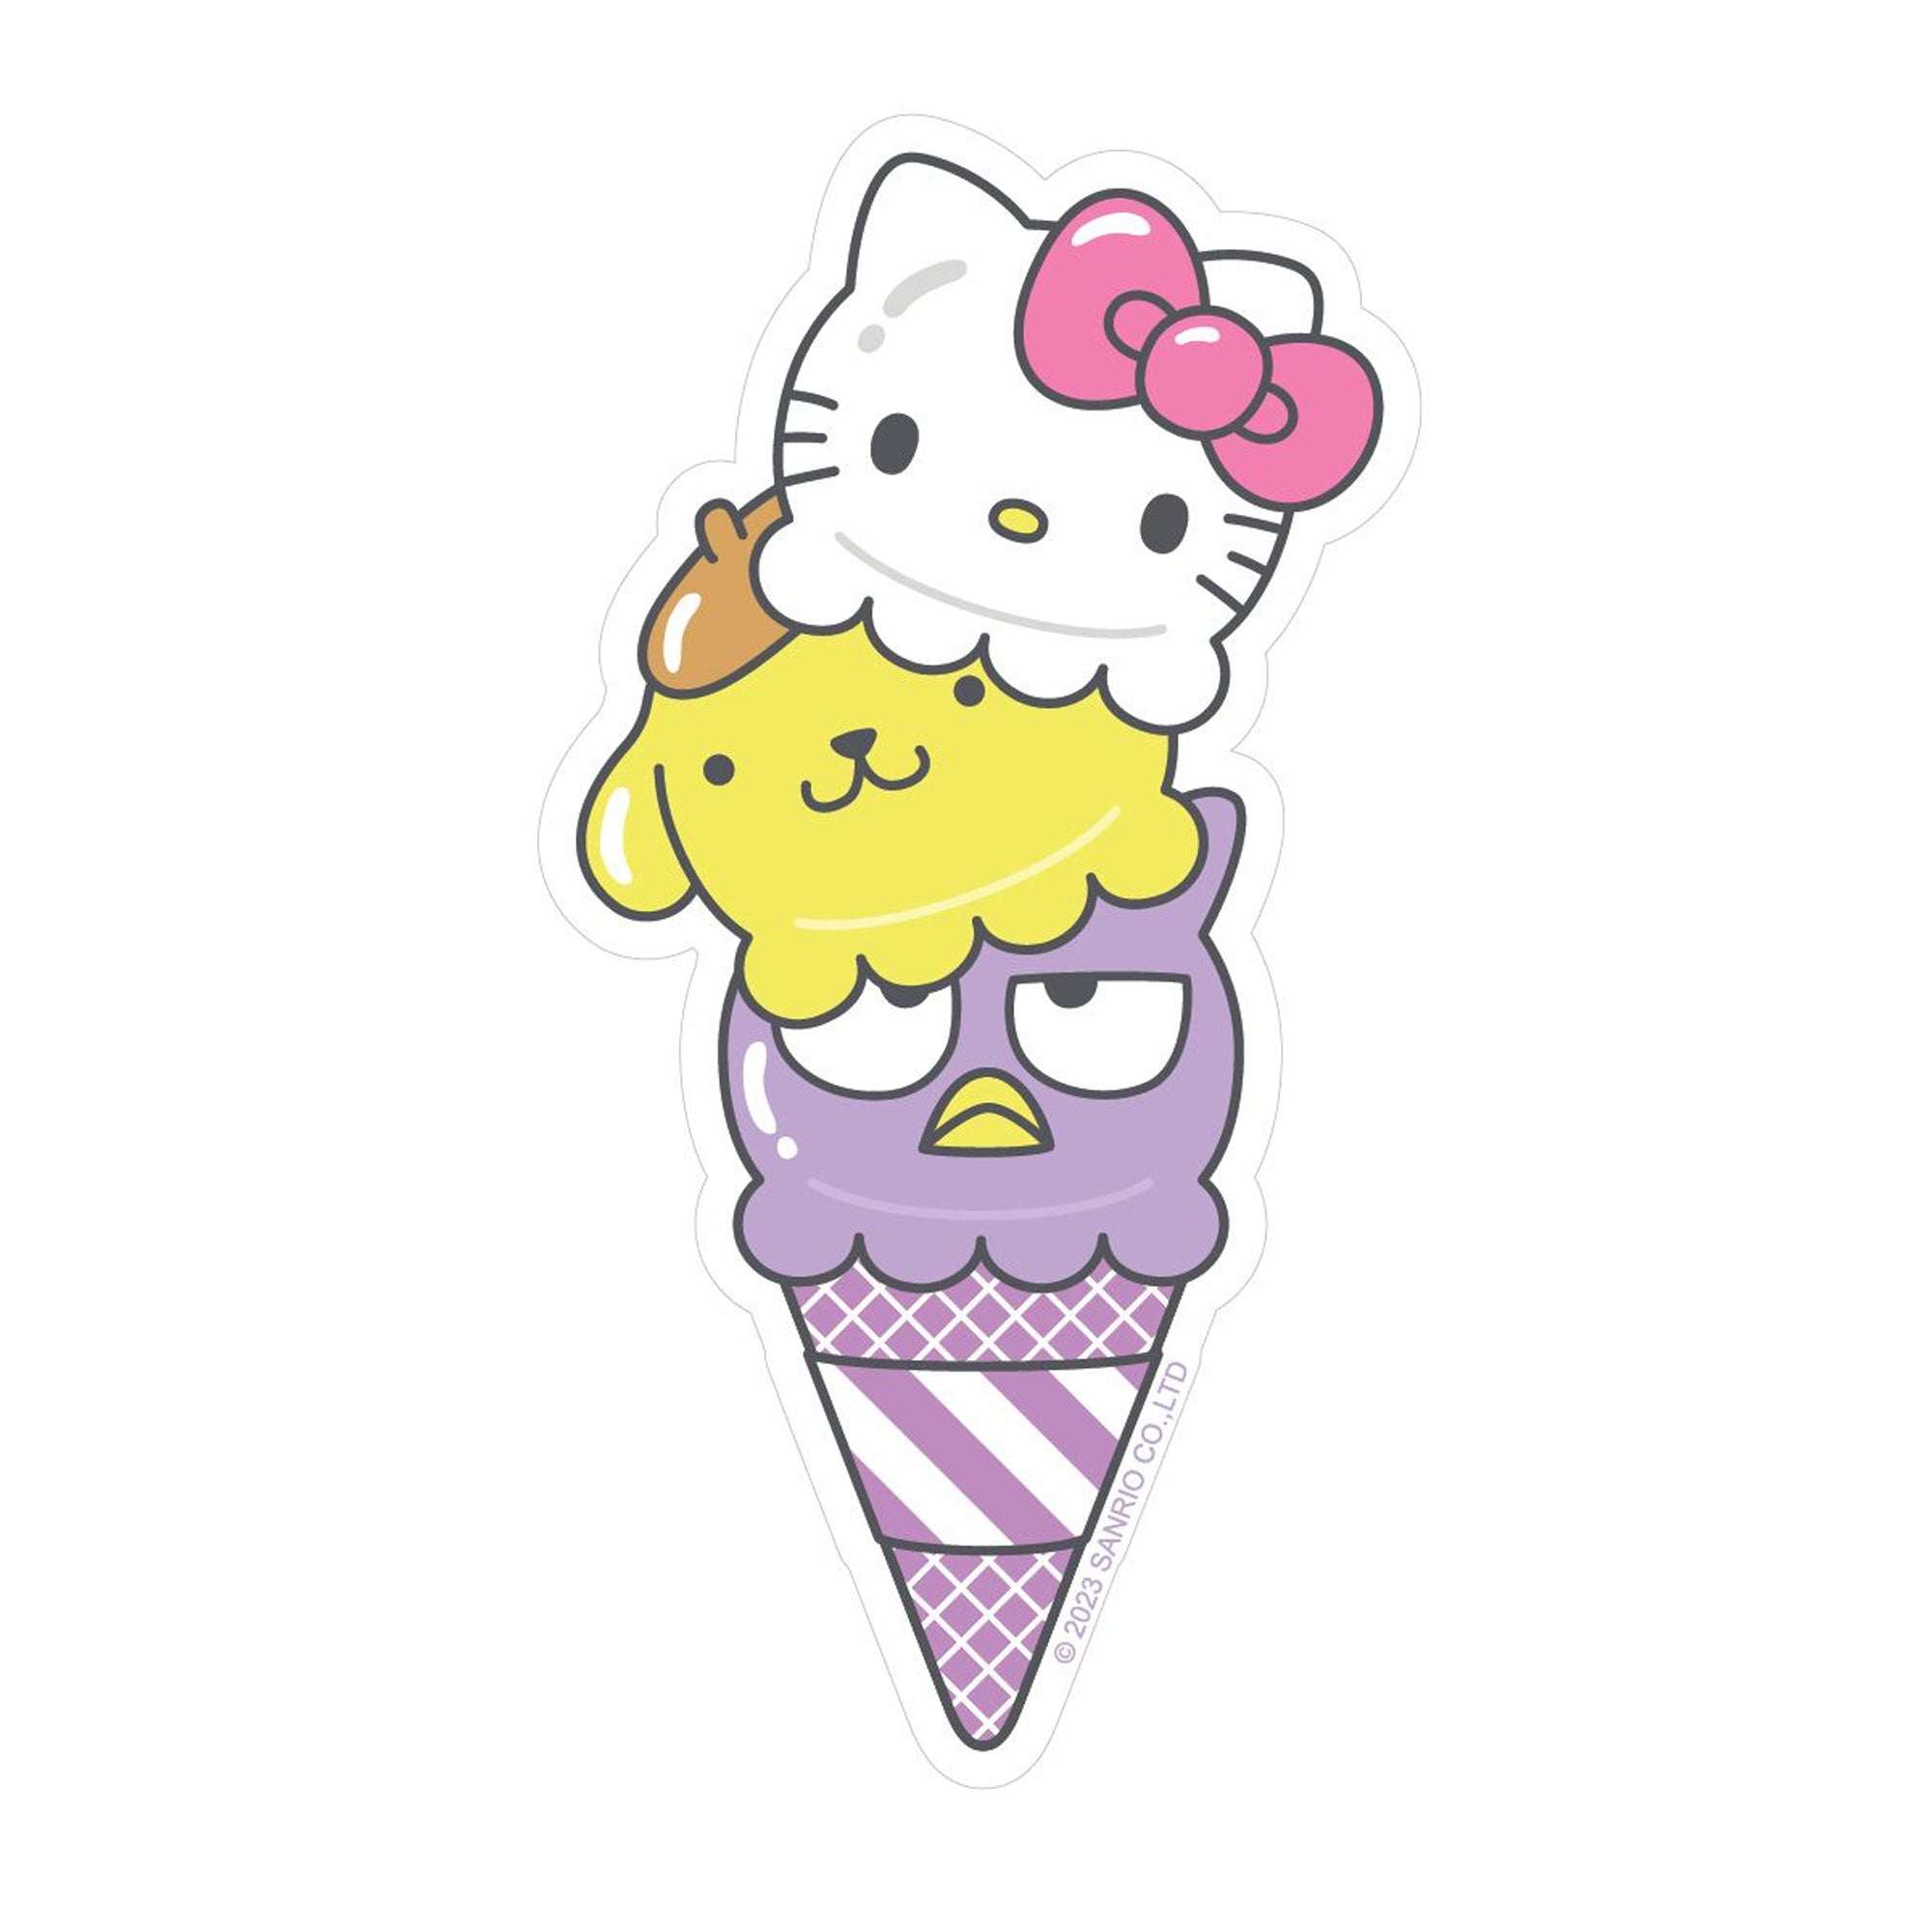 Hello Kitty and Friends Stickers (300 ct)